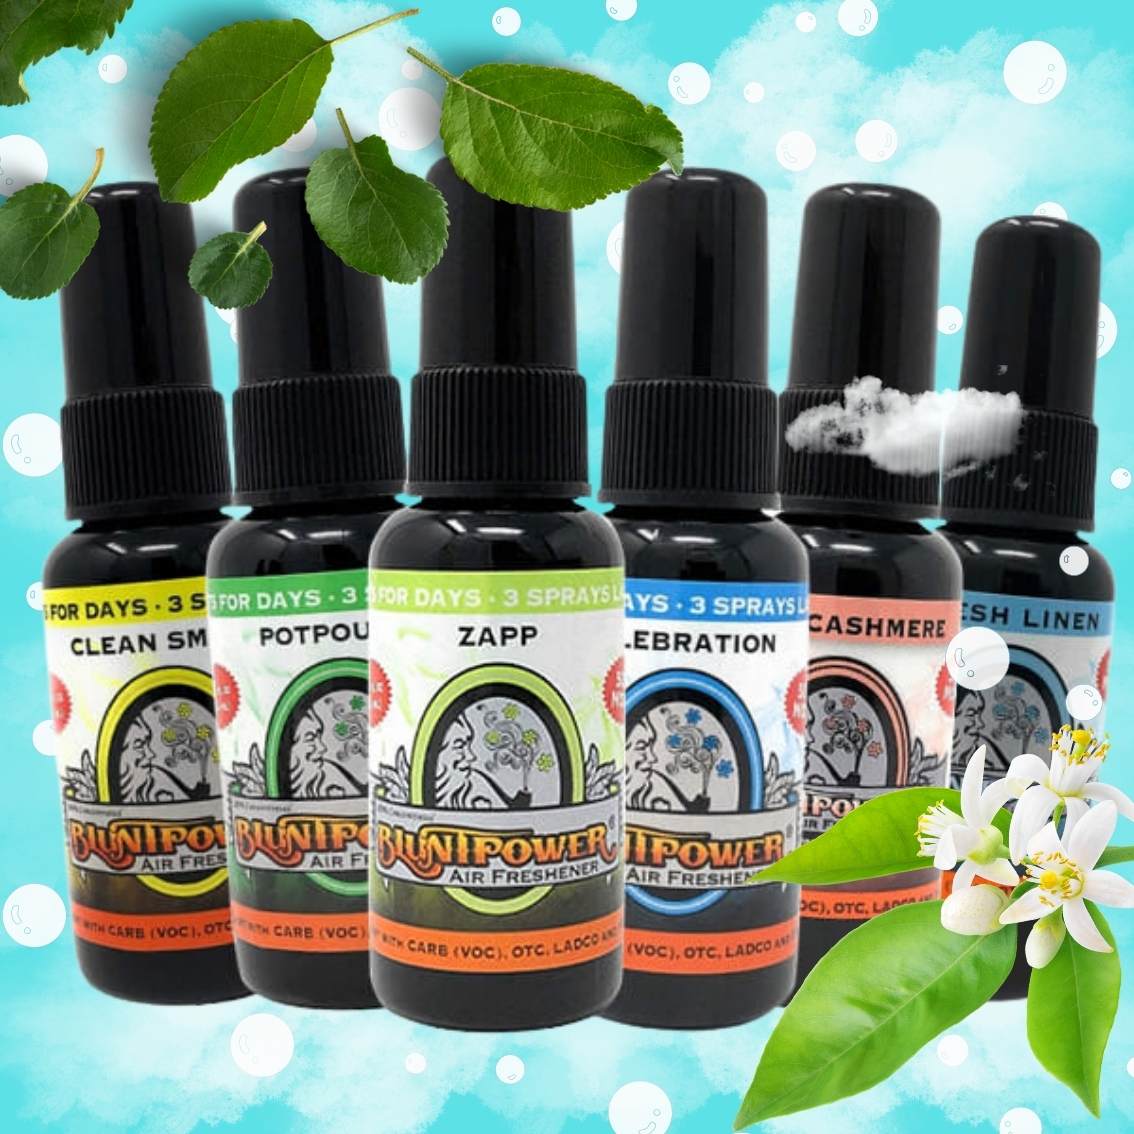 Fresh and Clean Fragrance Oil Collection